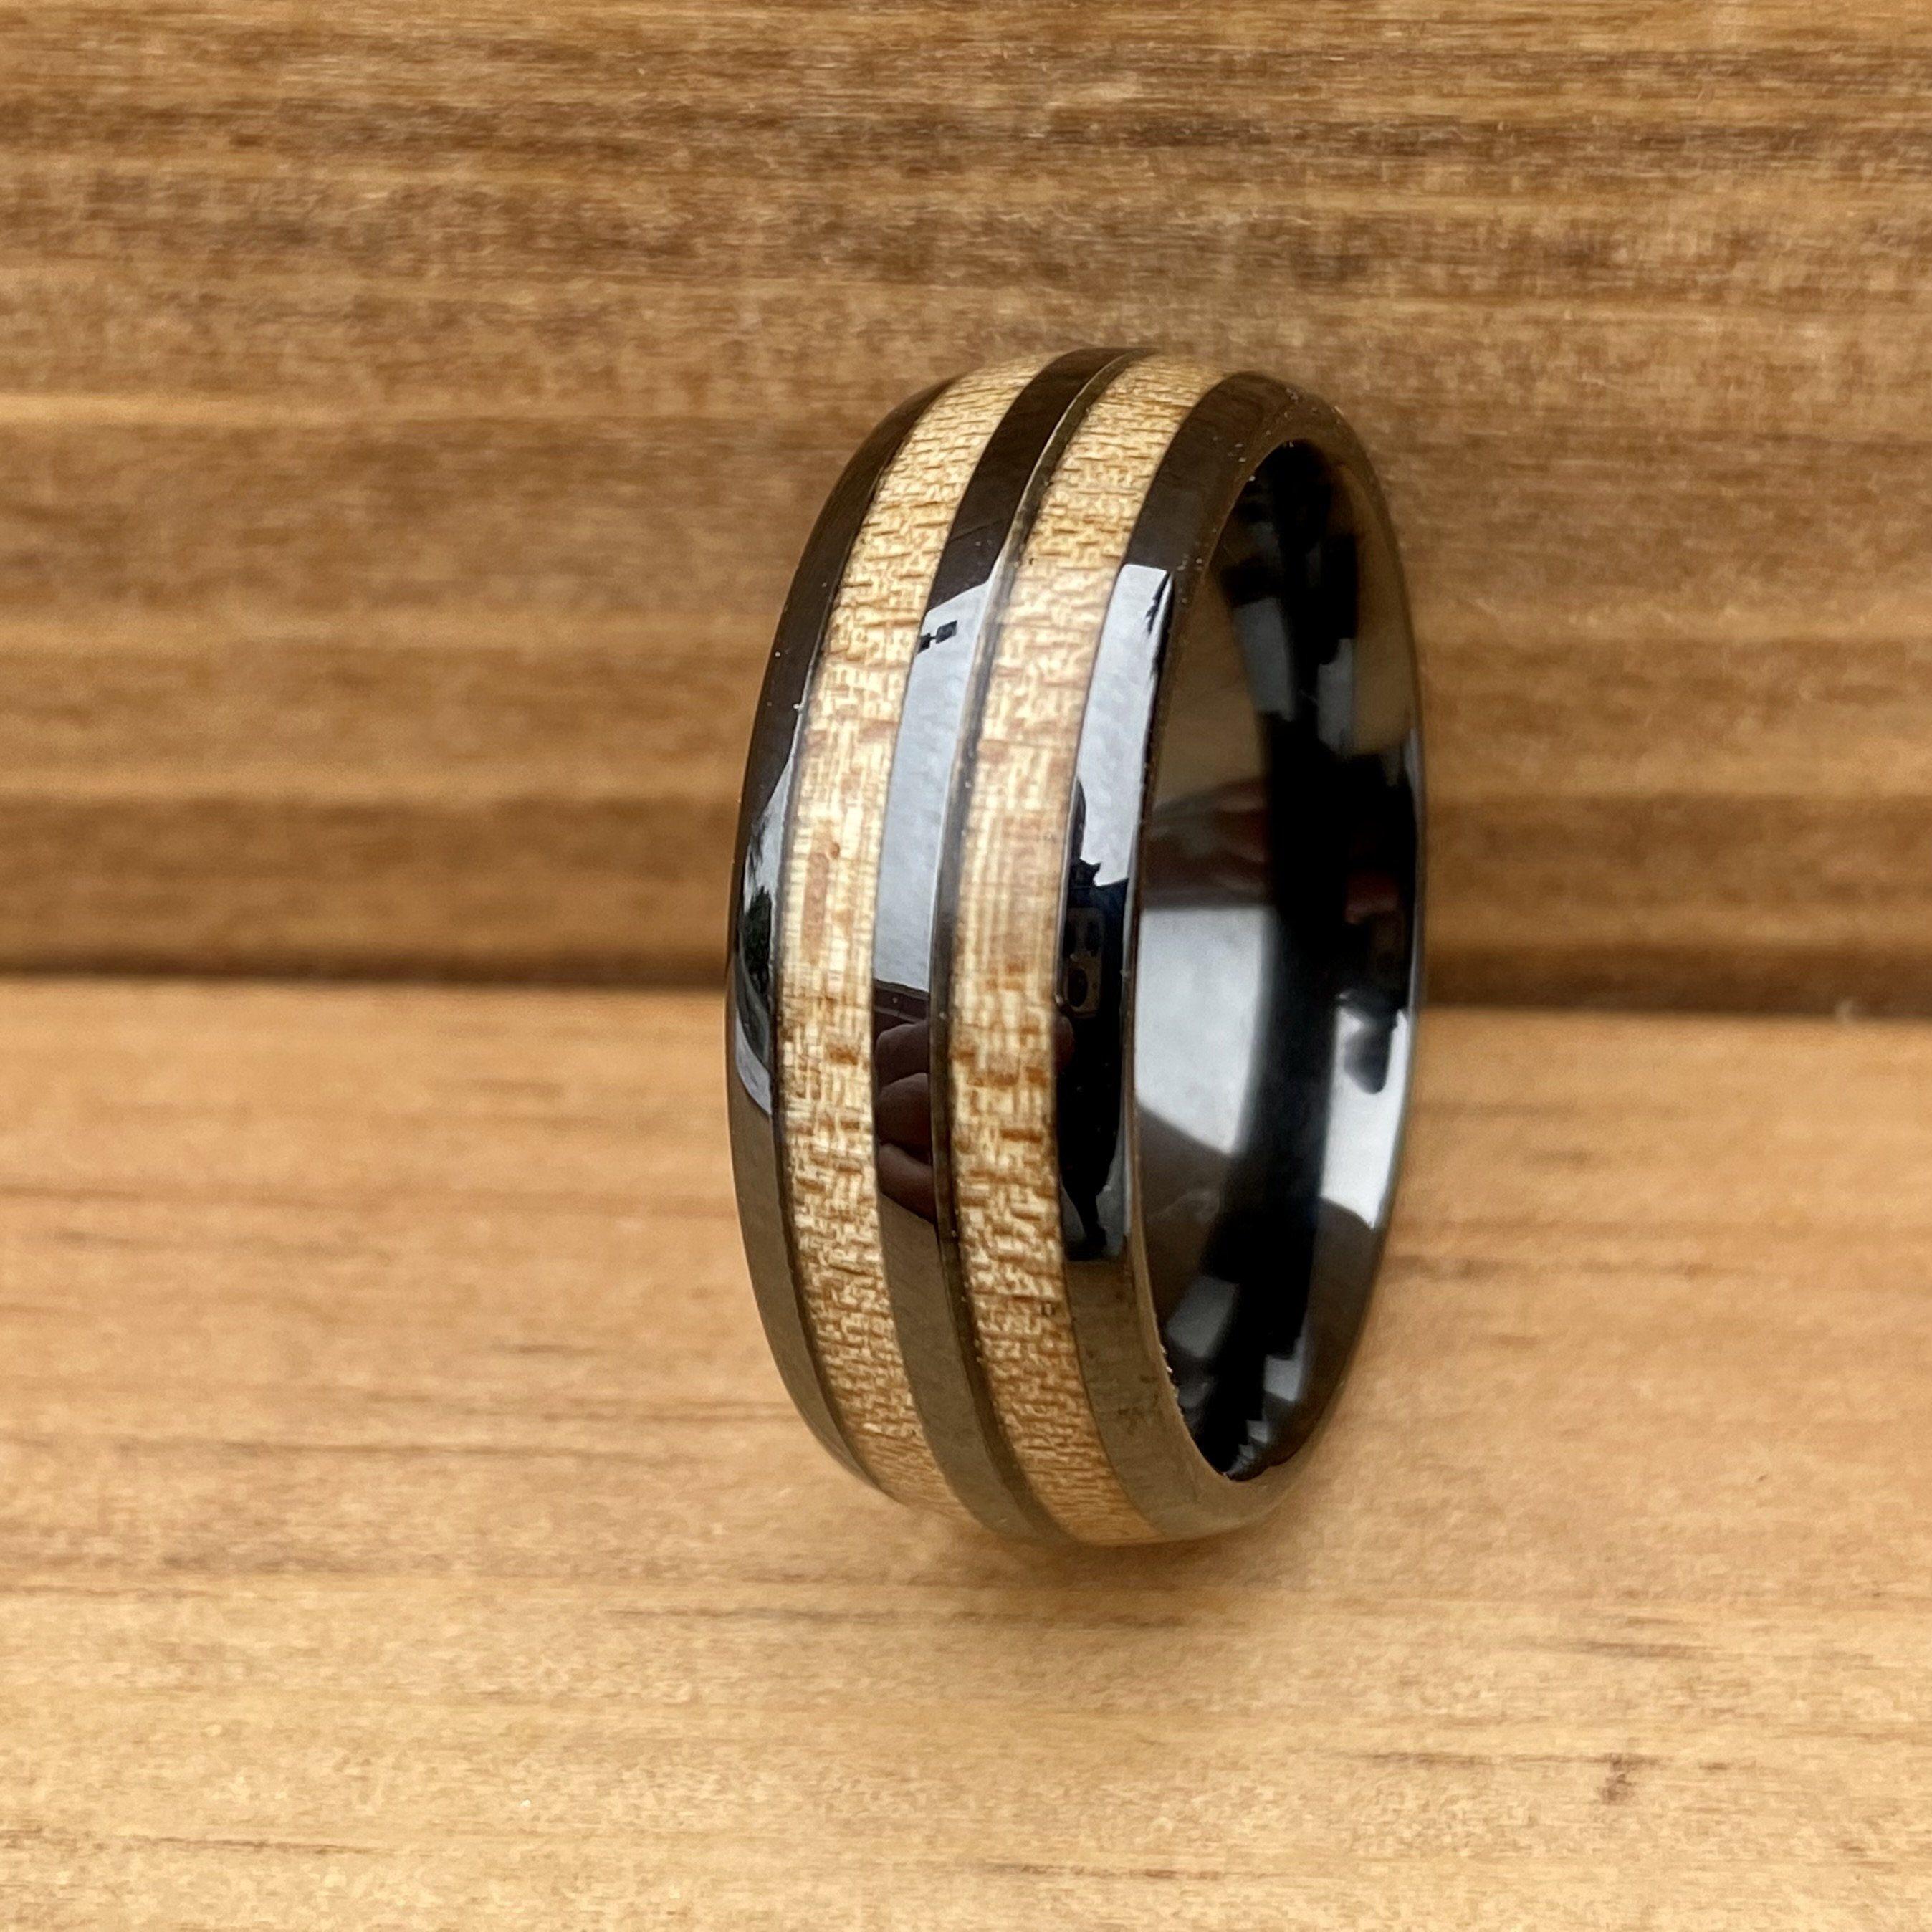 BW James Jewelers ALT Wedding Band “The Spitfire” 100% USA Made Black Ceramic Ring With Wood From RAF Spitfire Airplane